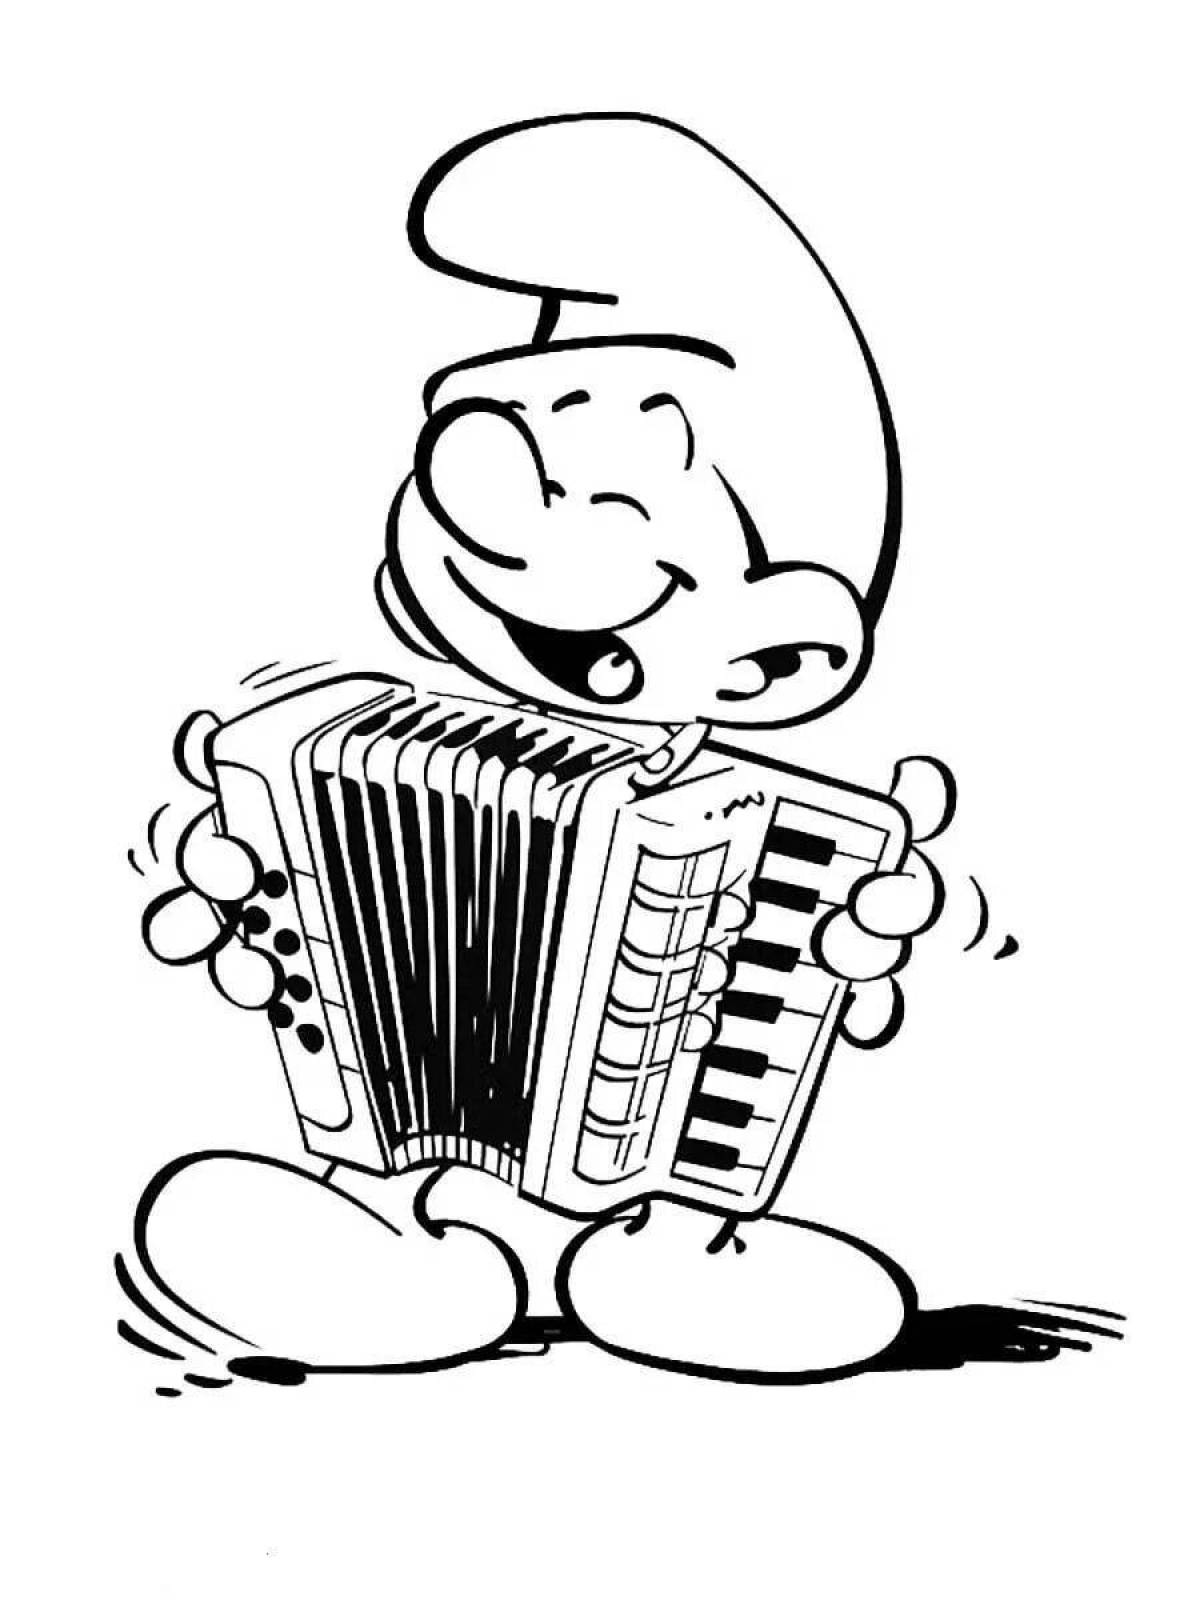 Exotic accordion coloring page